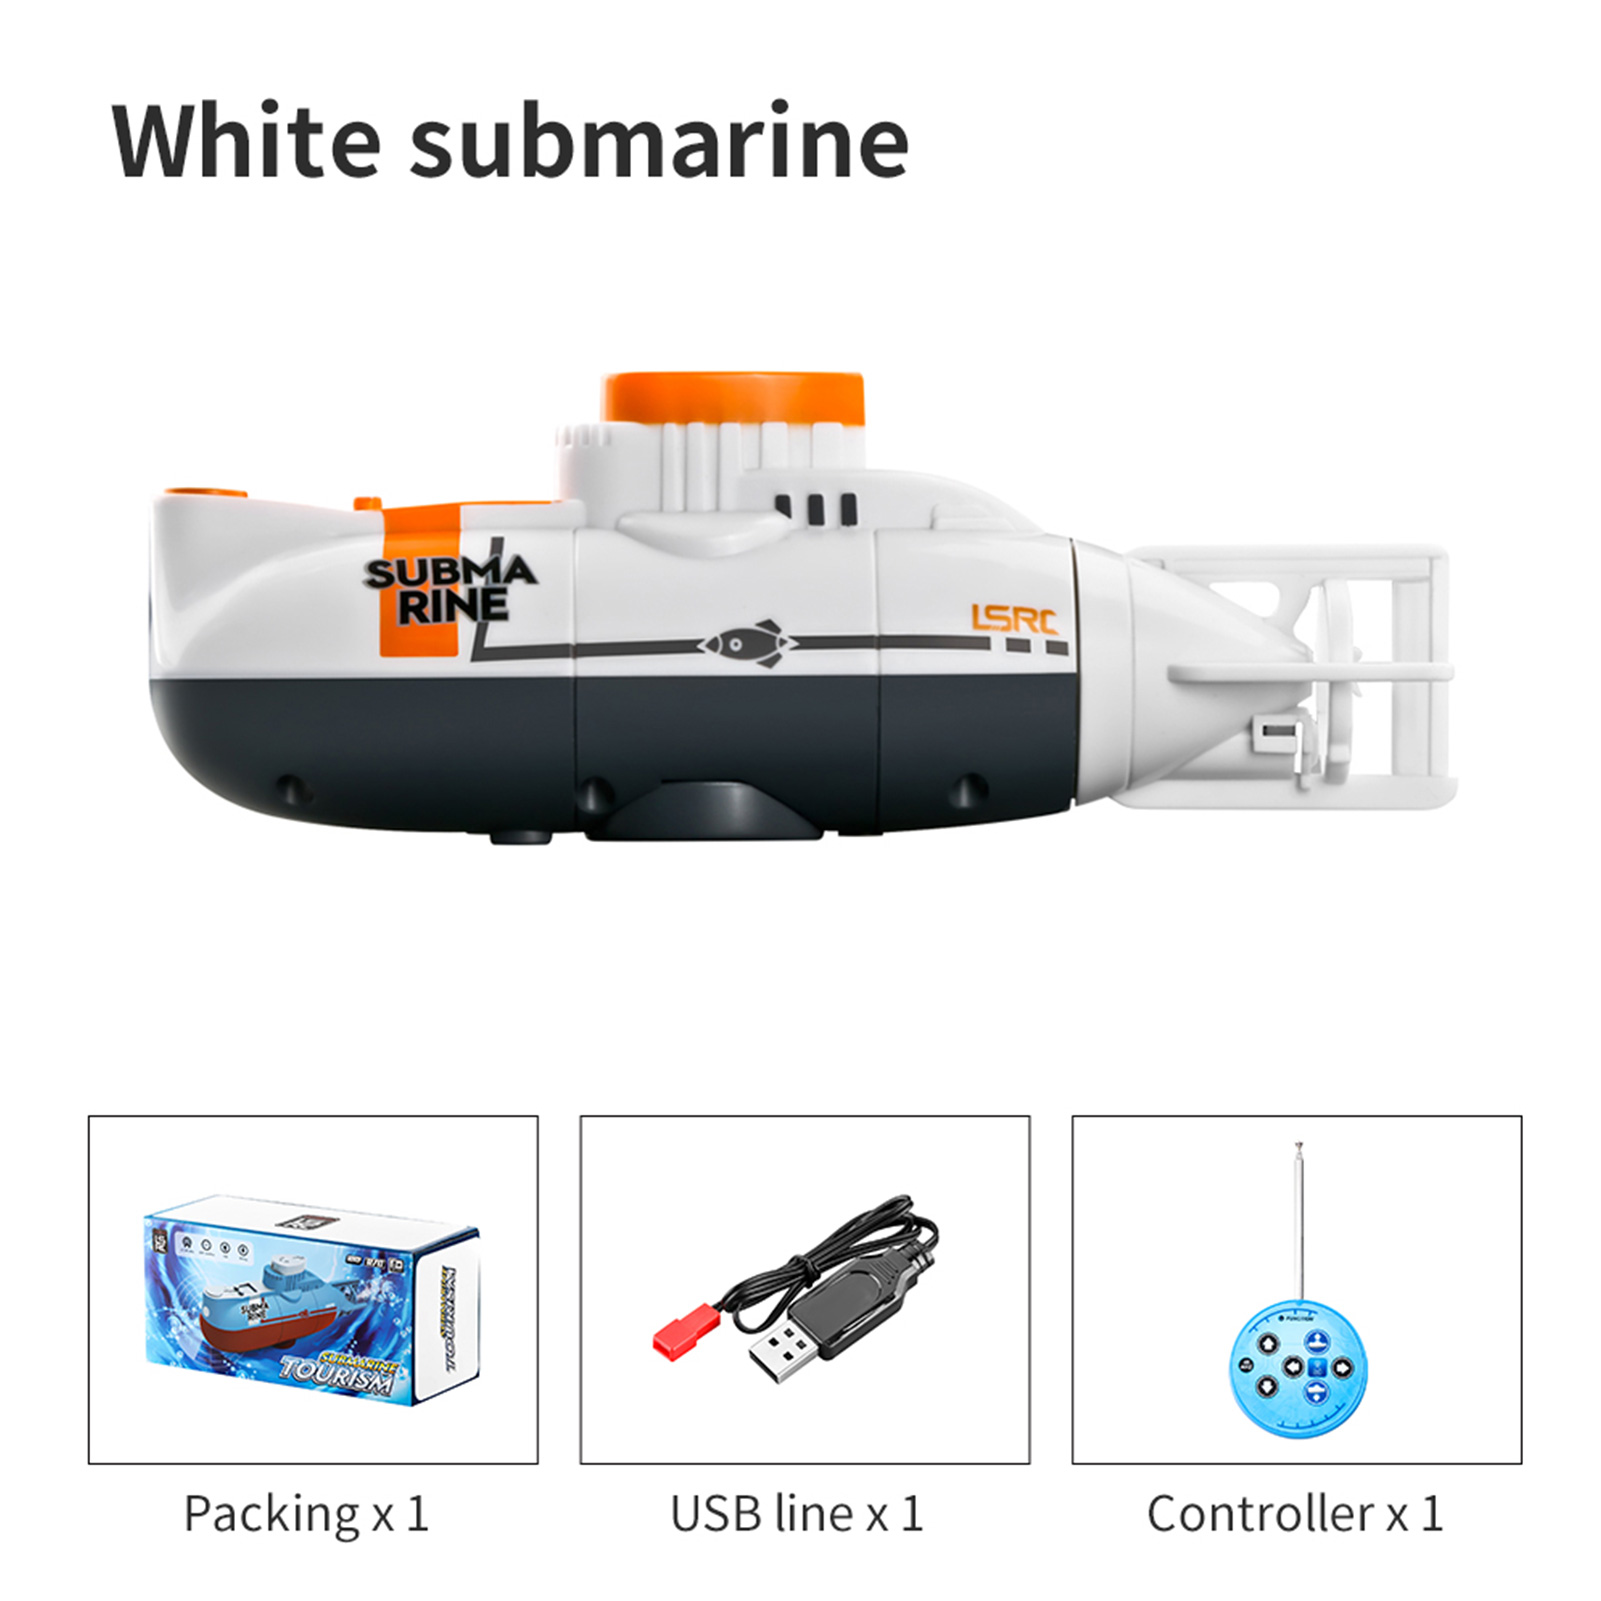 Mini RC Submarine 0.1m/s Speed Remote Control Boat Waterproof Diving RC Simulation Model Toys for Kids Boys ChildrenType:Black